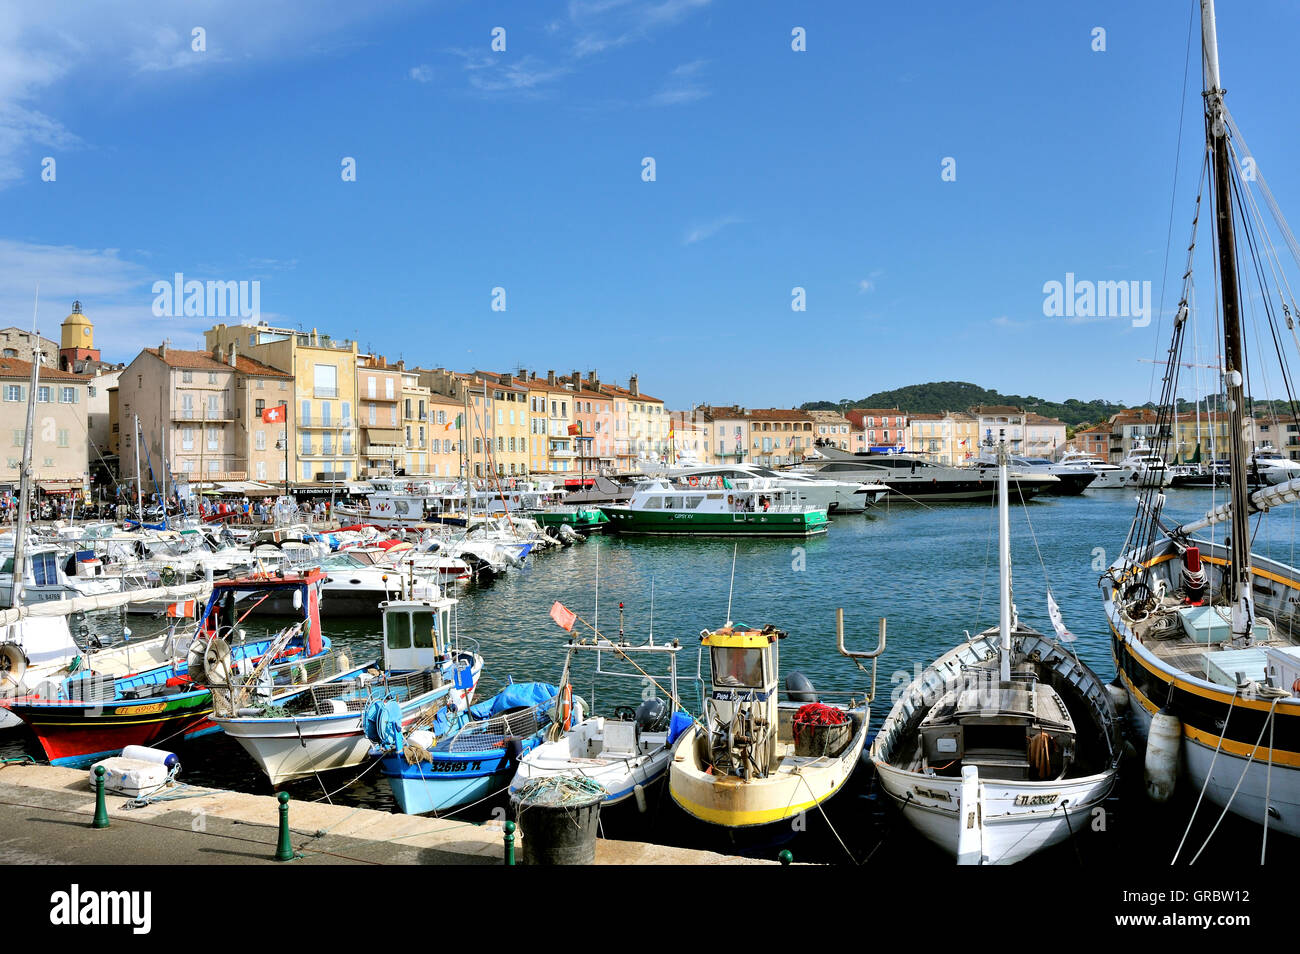 In The Port Of Saint-Tropez, Southern France, French Alps, France Stock Photo